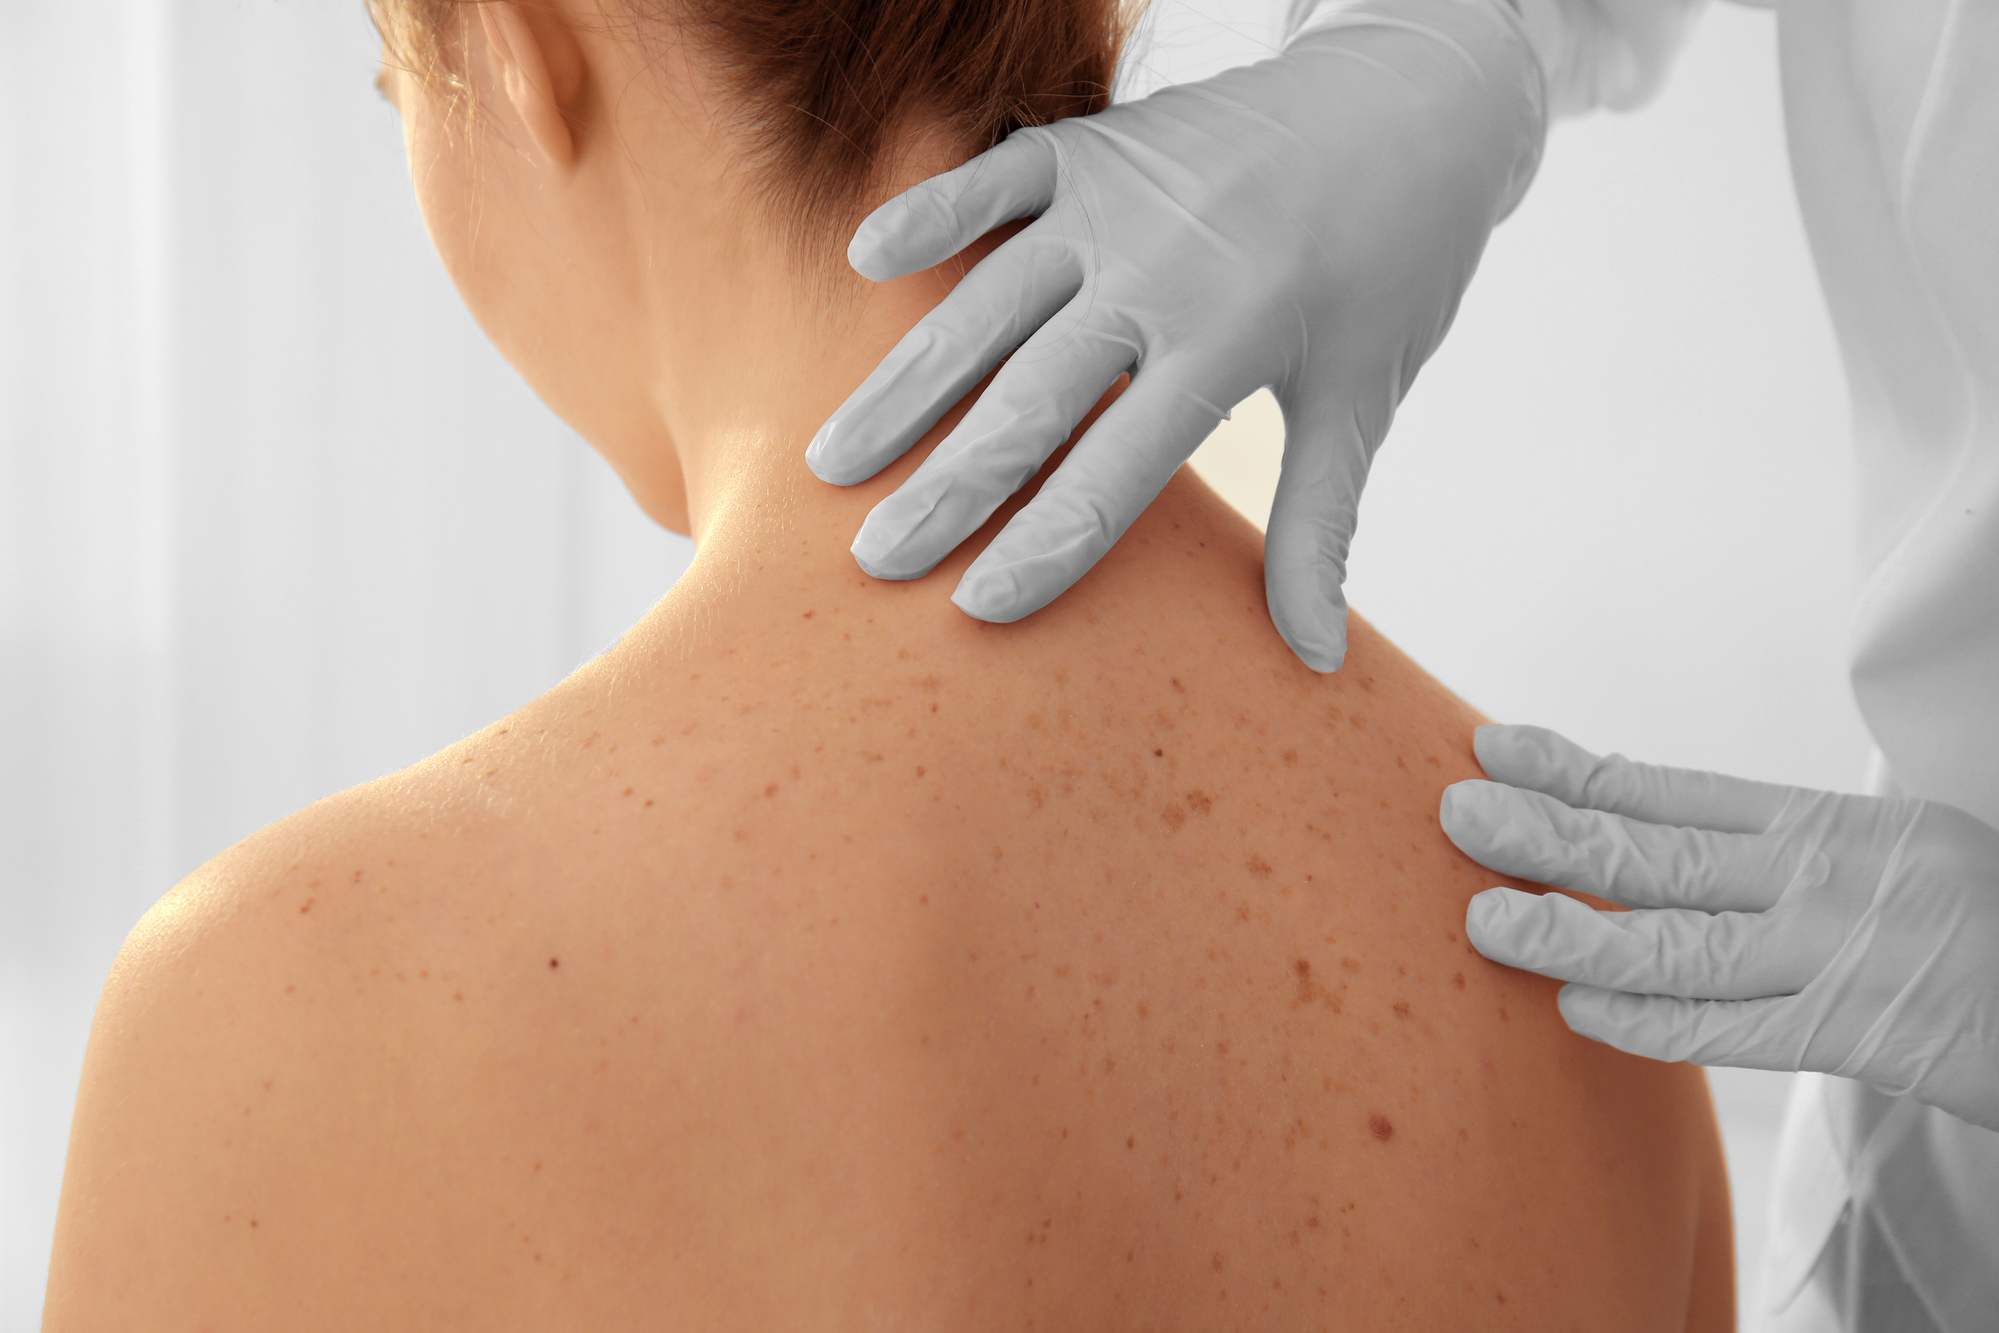 What to Expect During a Skin Cancer Screening